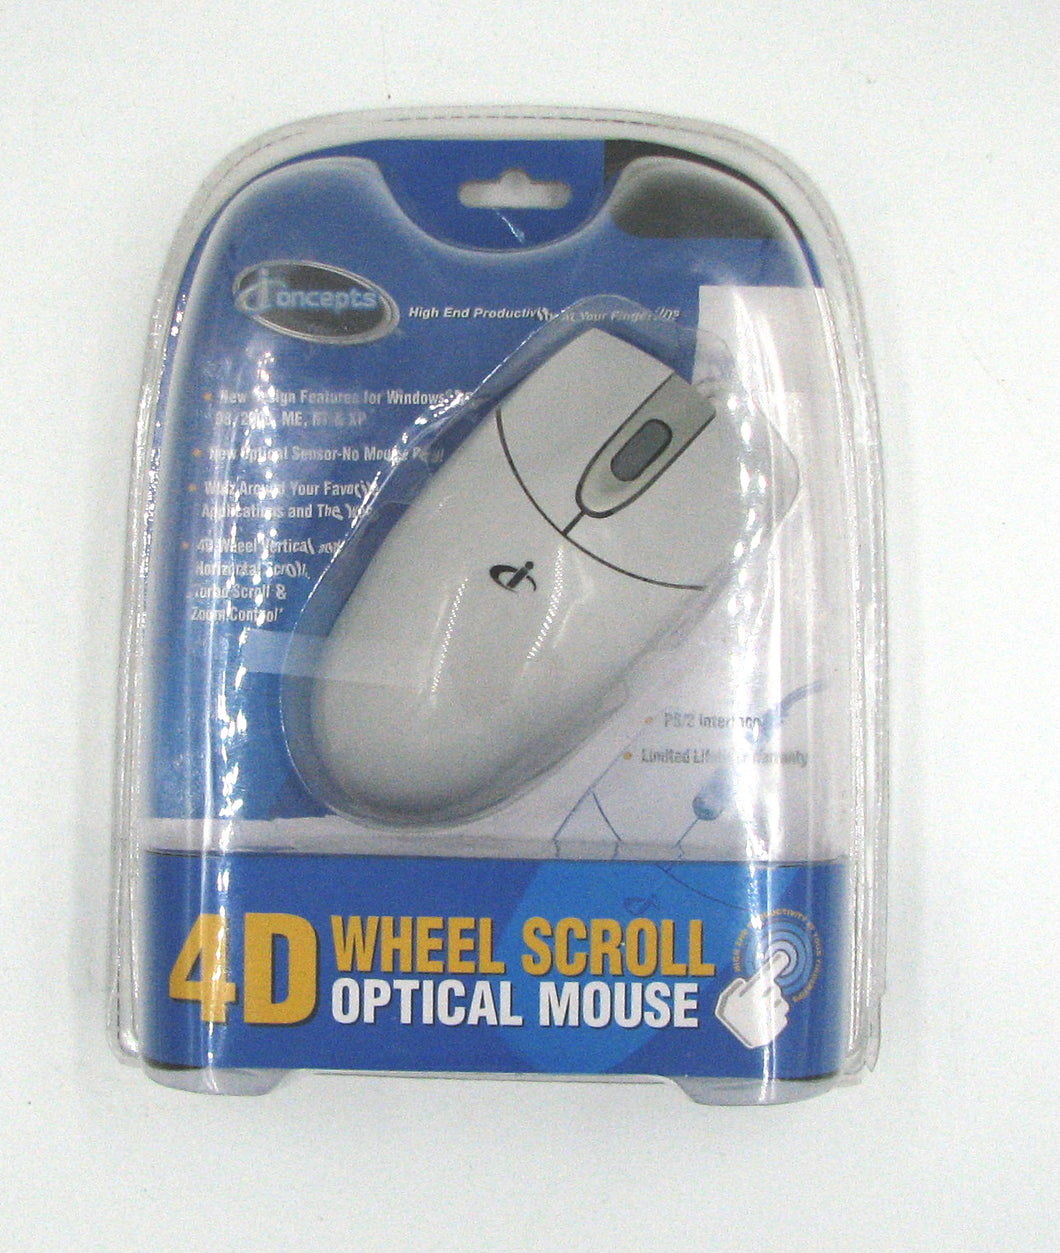 ICONCEPTS wheel (3 button) Ball Mouse PS/2 interface